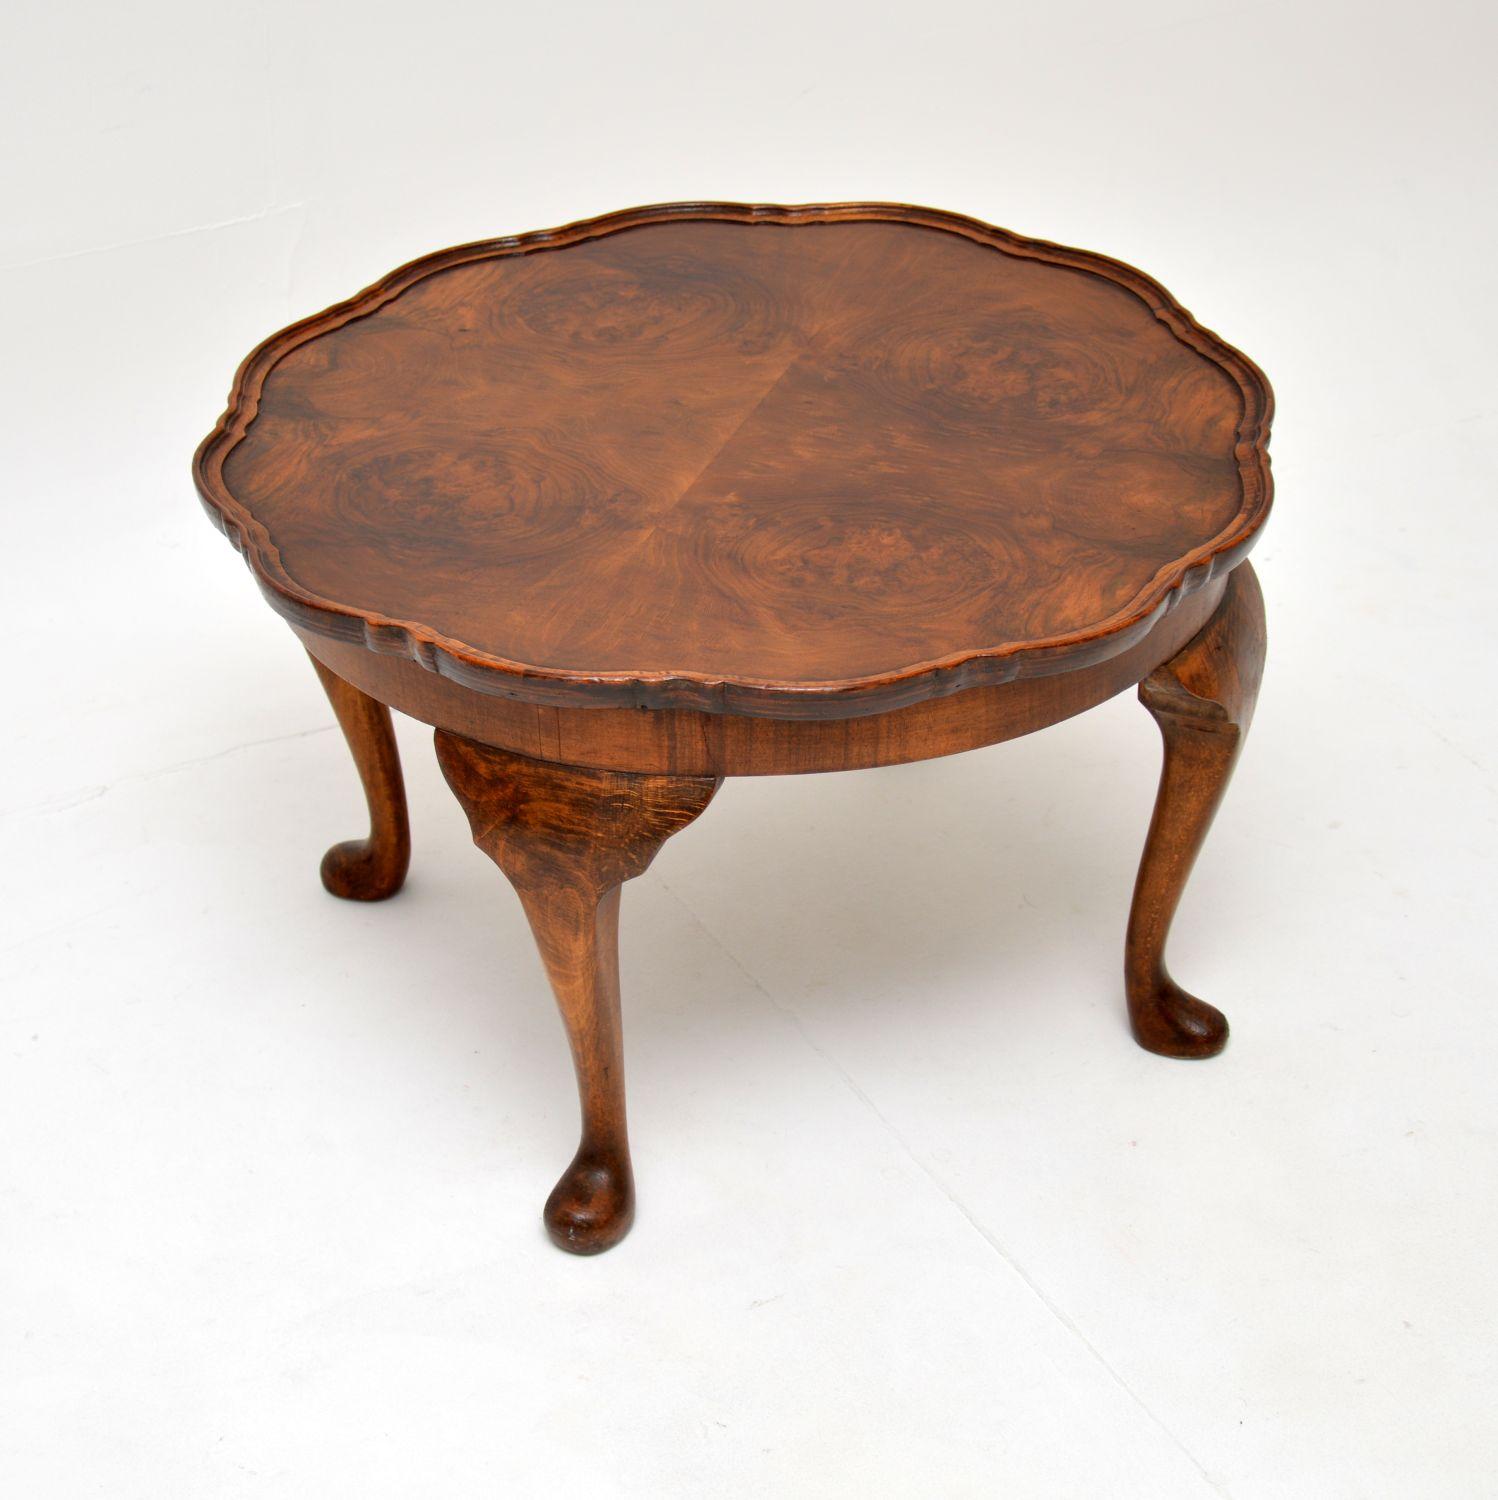 A lovely antique burr walnut circular coffee table with a raised pie crust edge. This was made in England, it dates from the 1920-30’s.

It is of very good quality and is a very useful size. The top has stunning burr walnut grain patterns, this sits